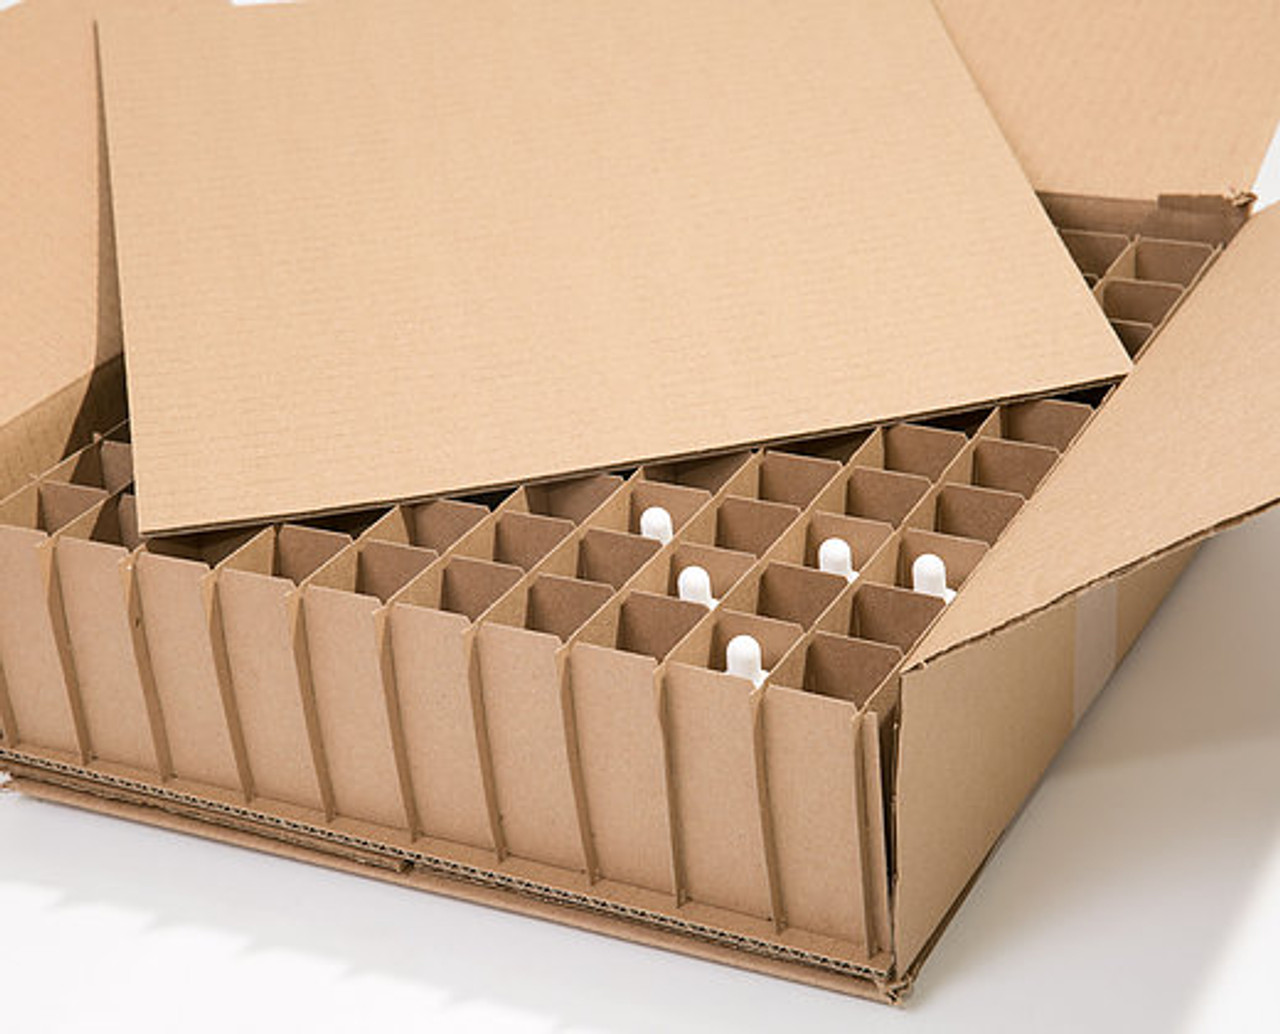 Corrugated Boxes with 100 cells Dividers (Fits 100 - 1oz. and 2oz. Bottles)  - Set of 40